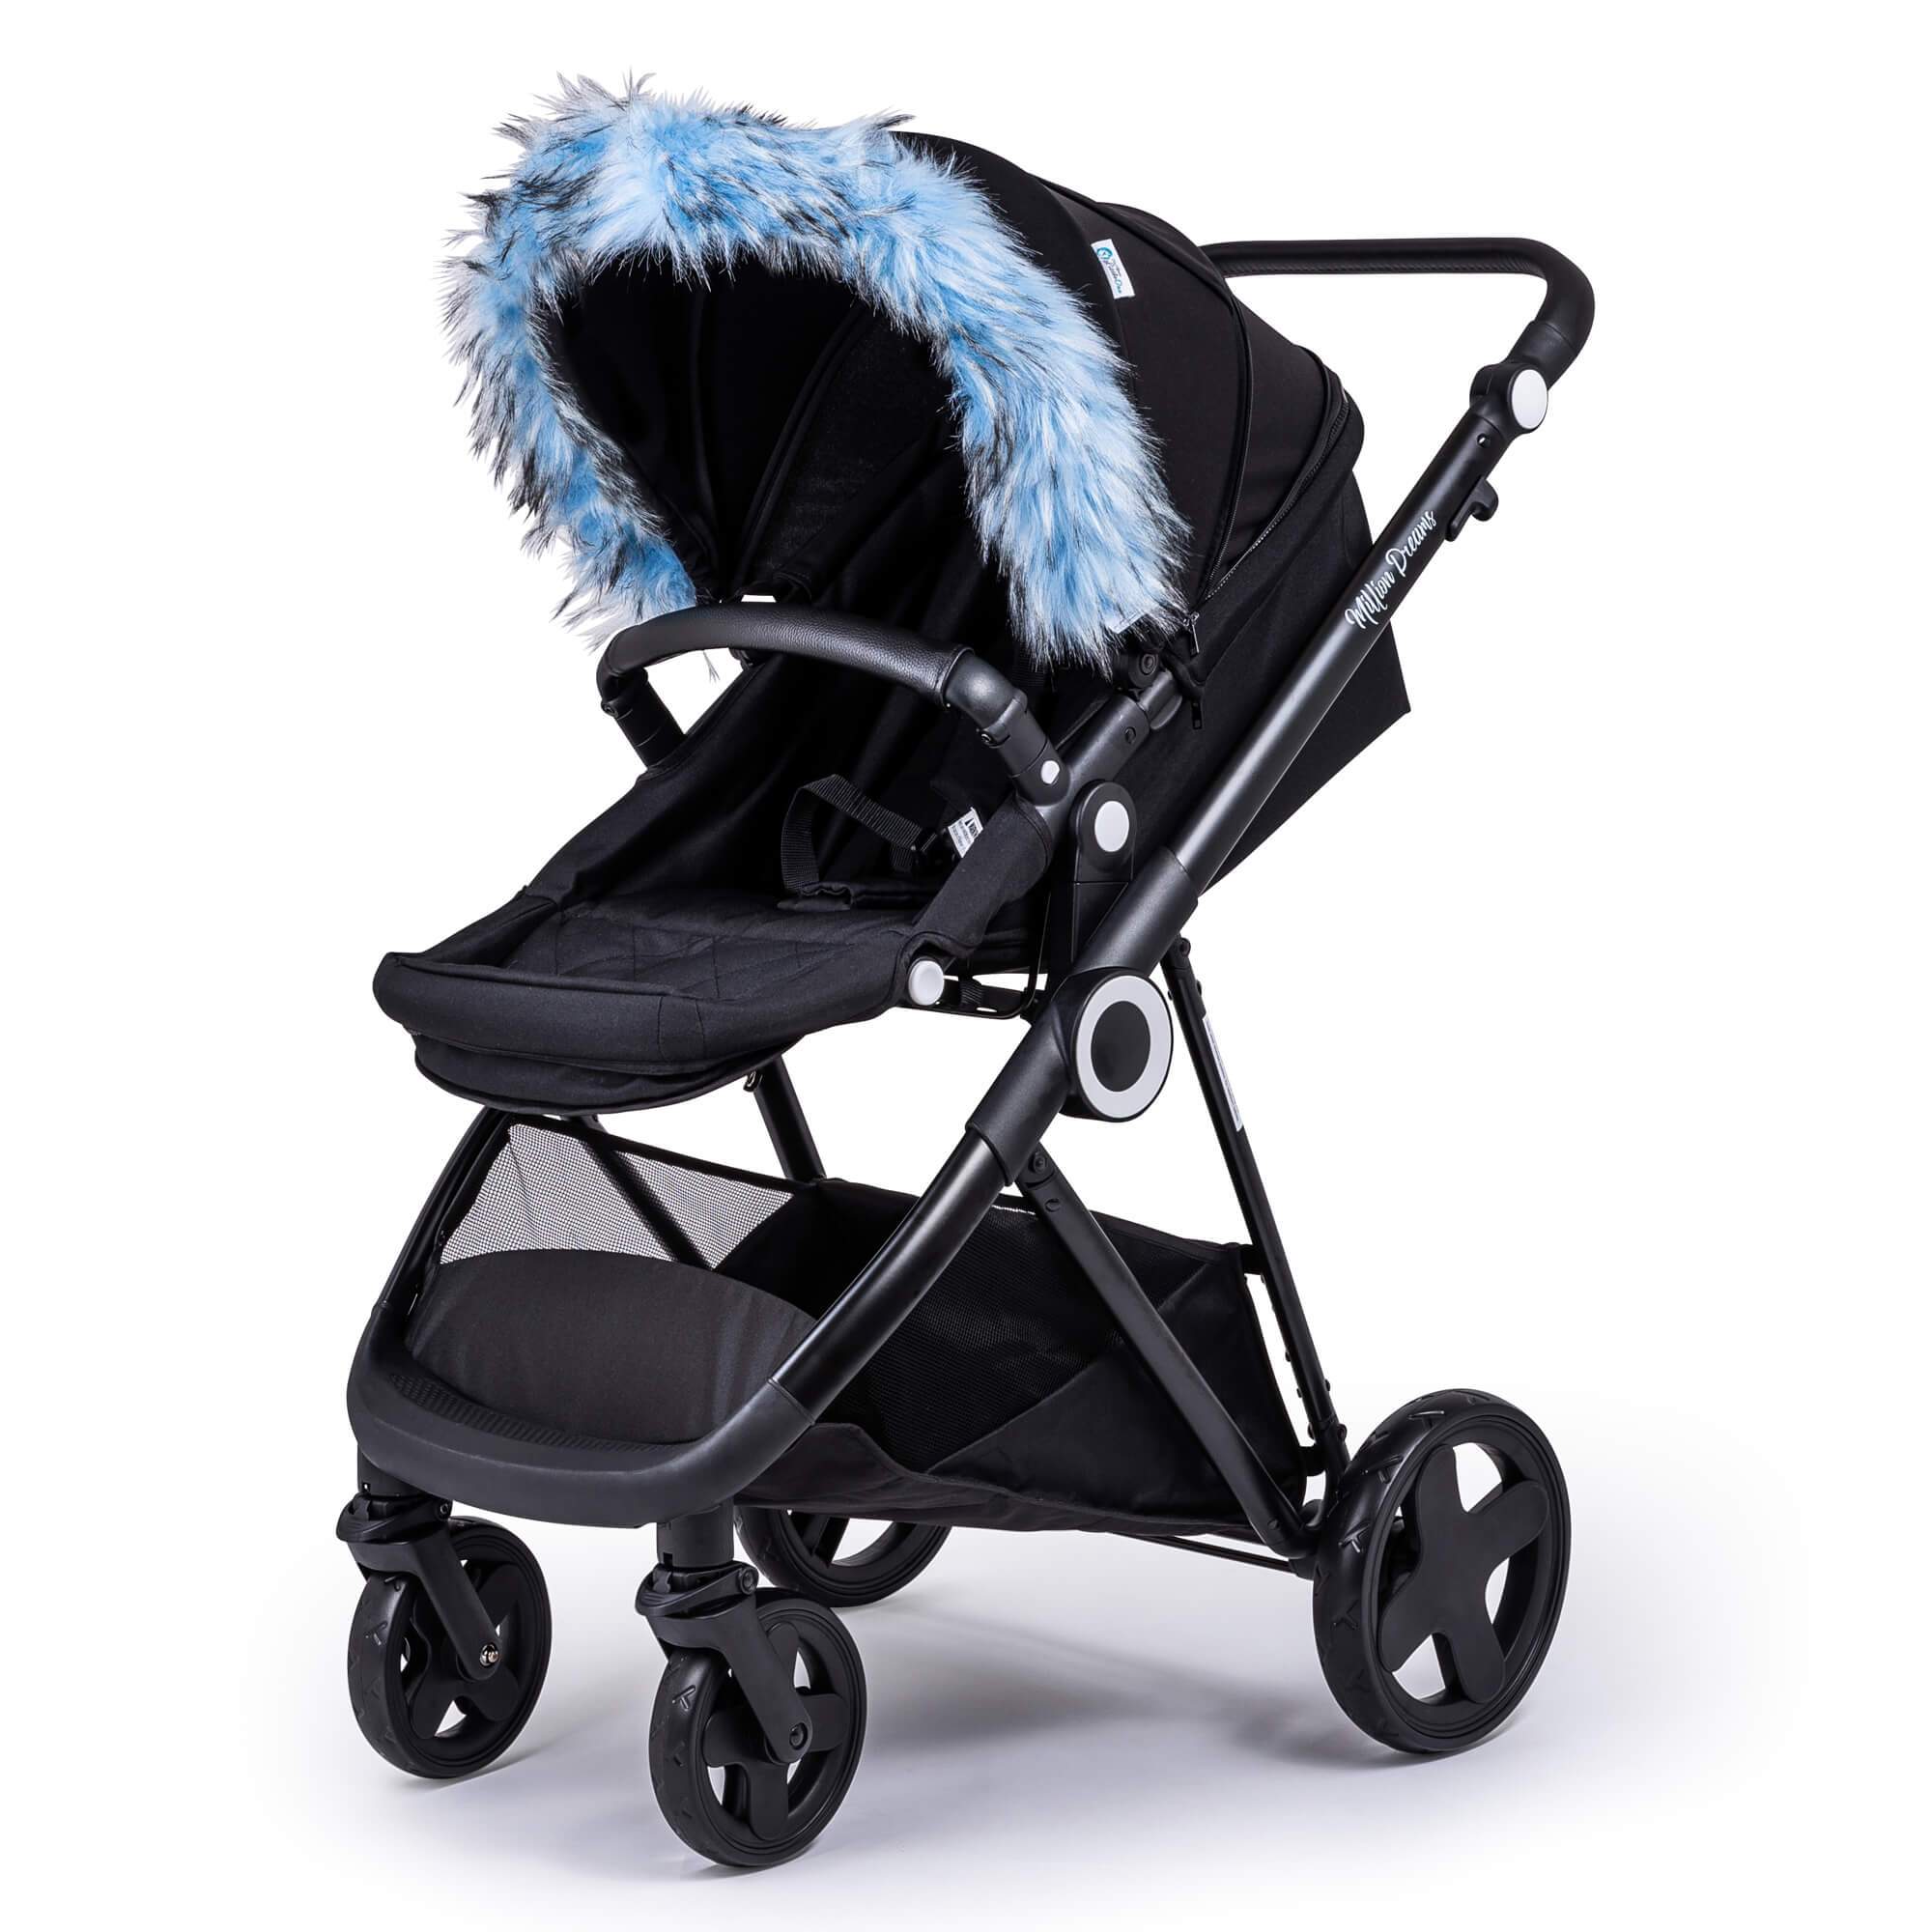 Pram Fur Hood Trim Attachment for Pushchair Compatible with Cybex - Light Blue / Fits All Models | For Your Little One